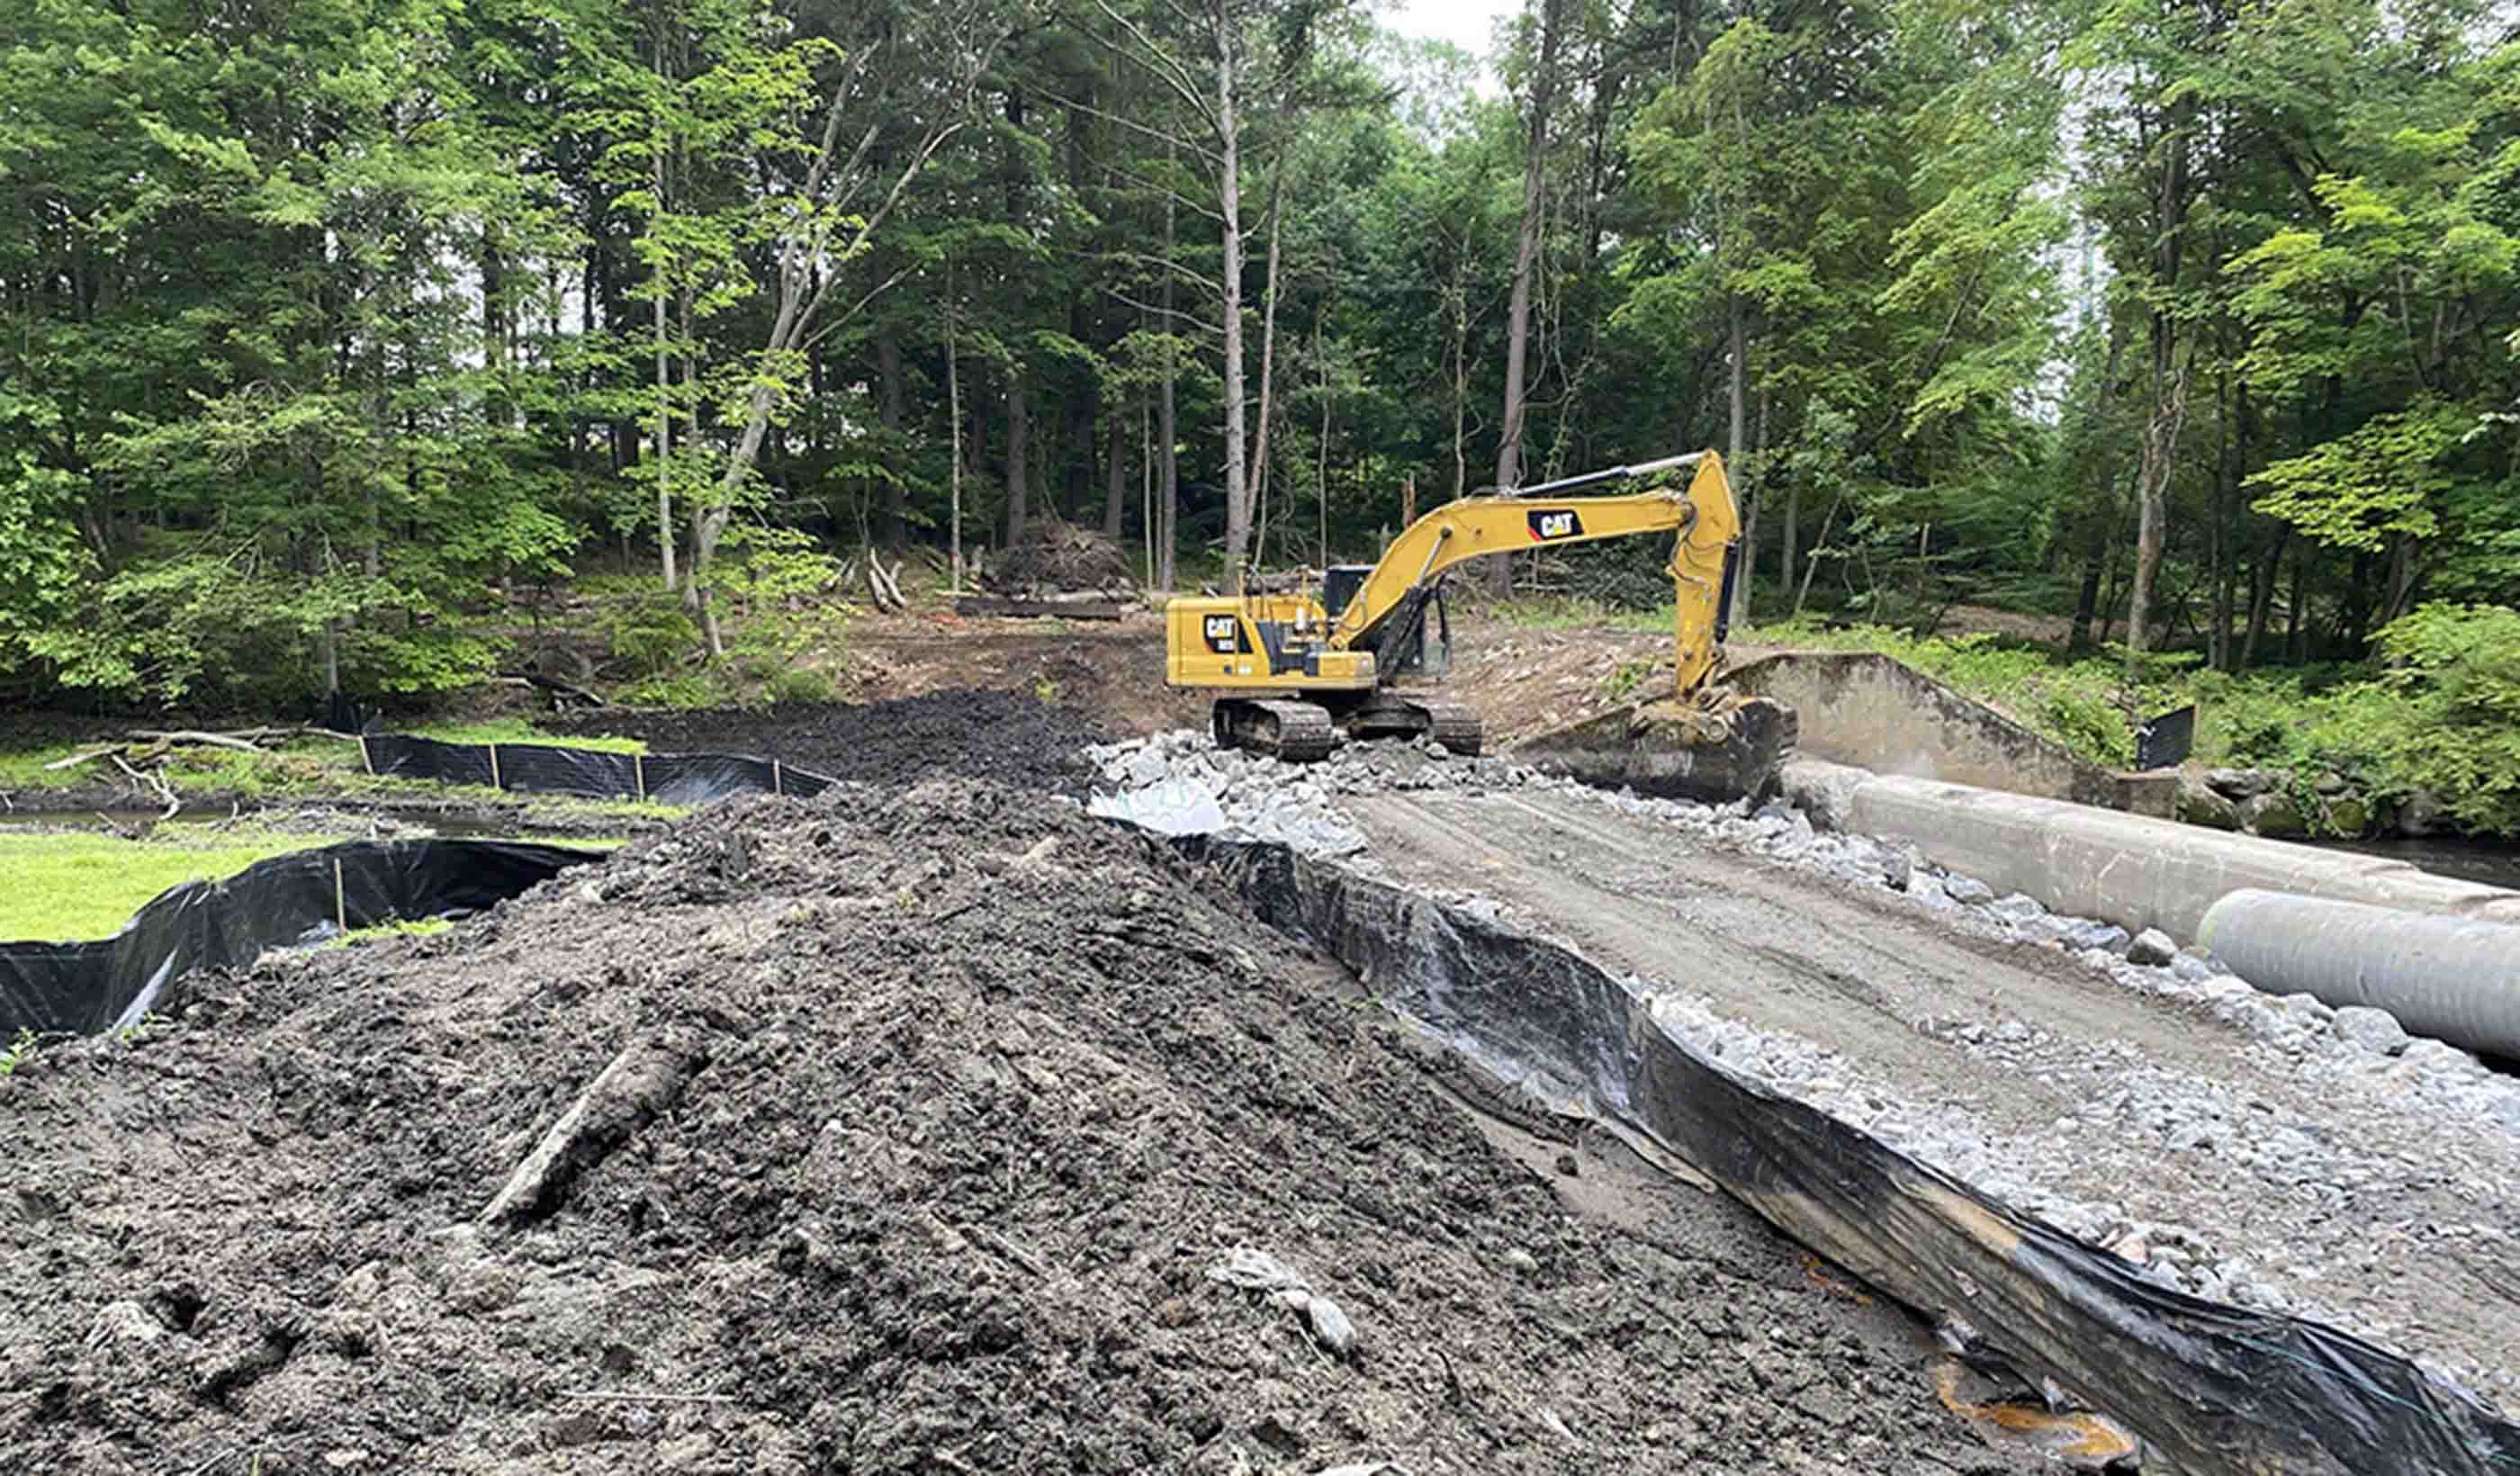 Dam removal: An engineer returns to restore a Connecticut river of his childhood